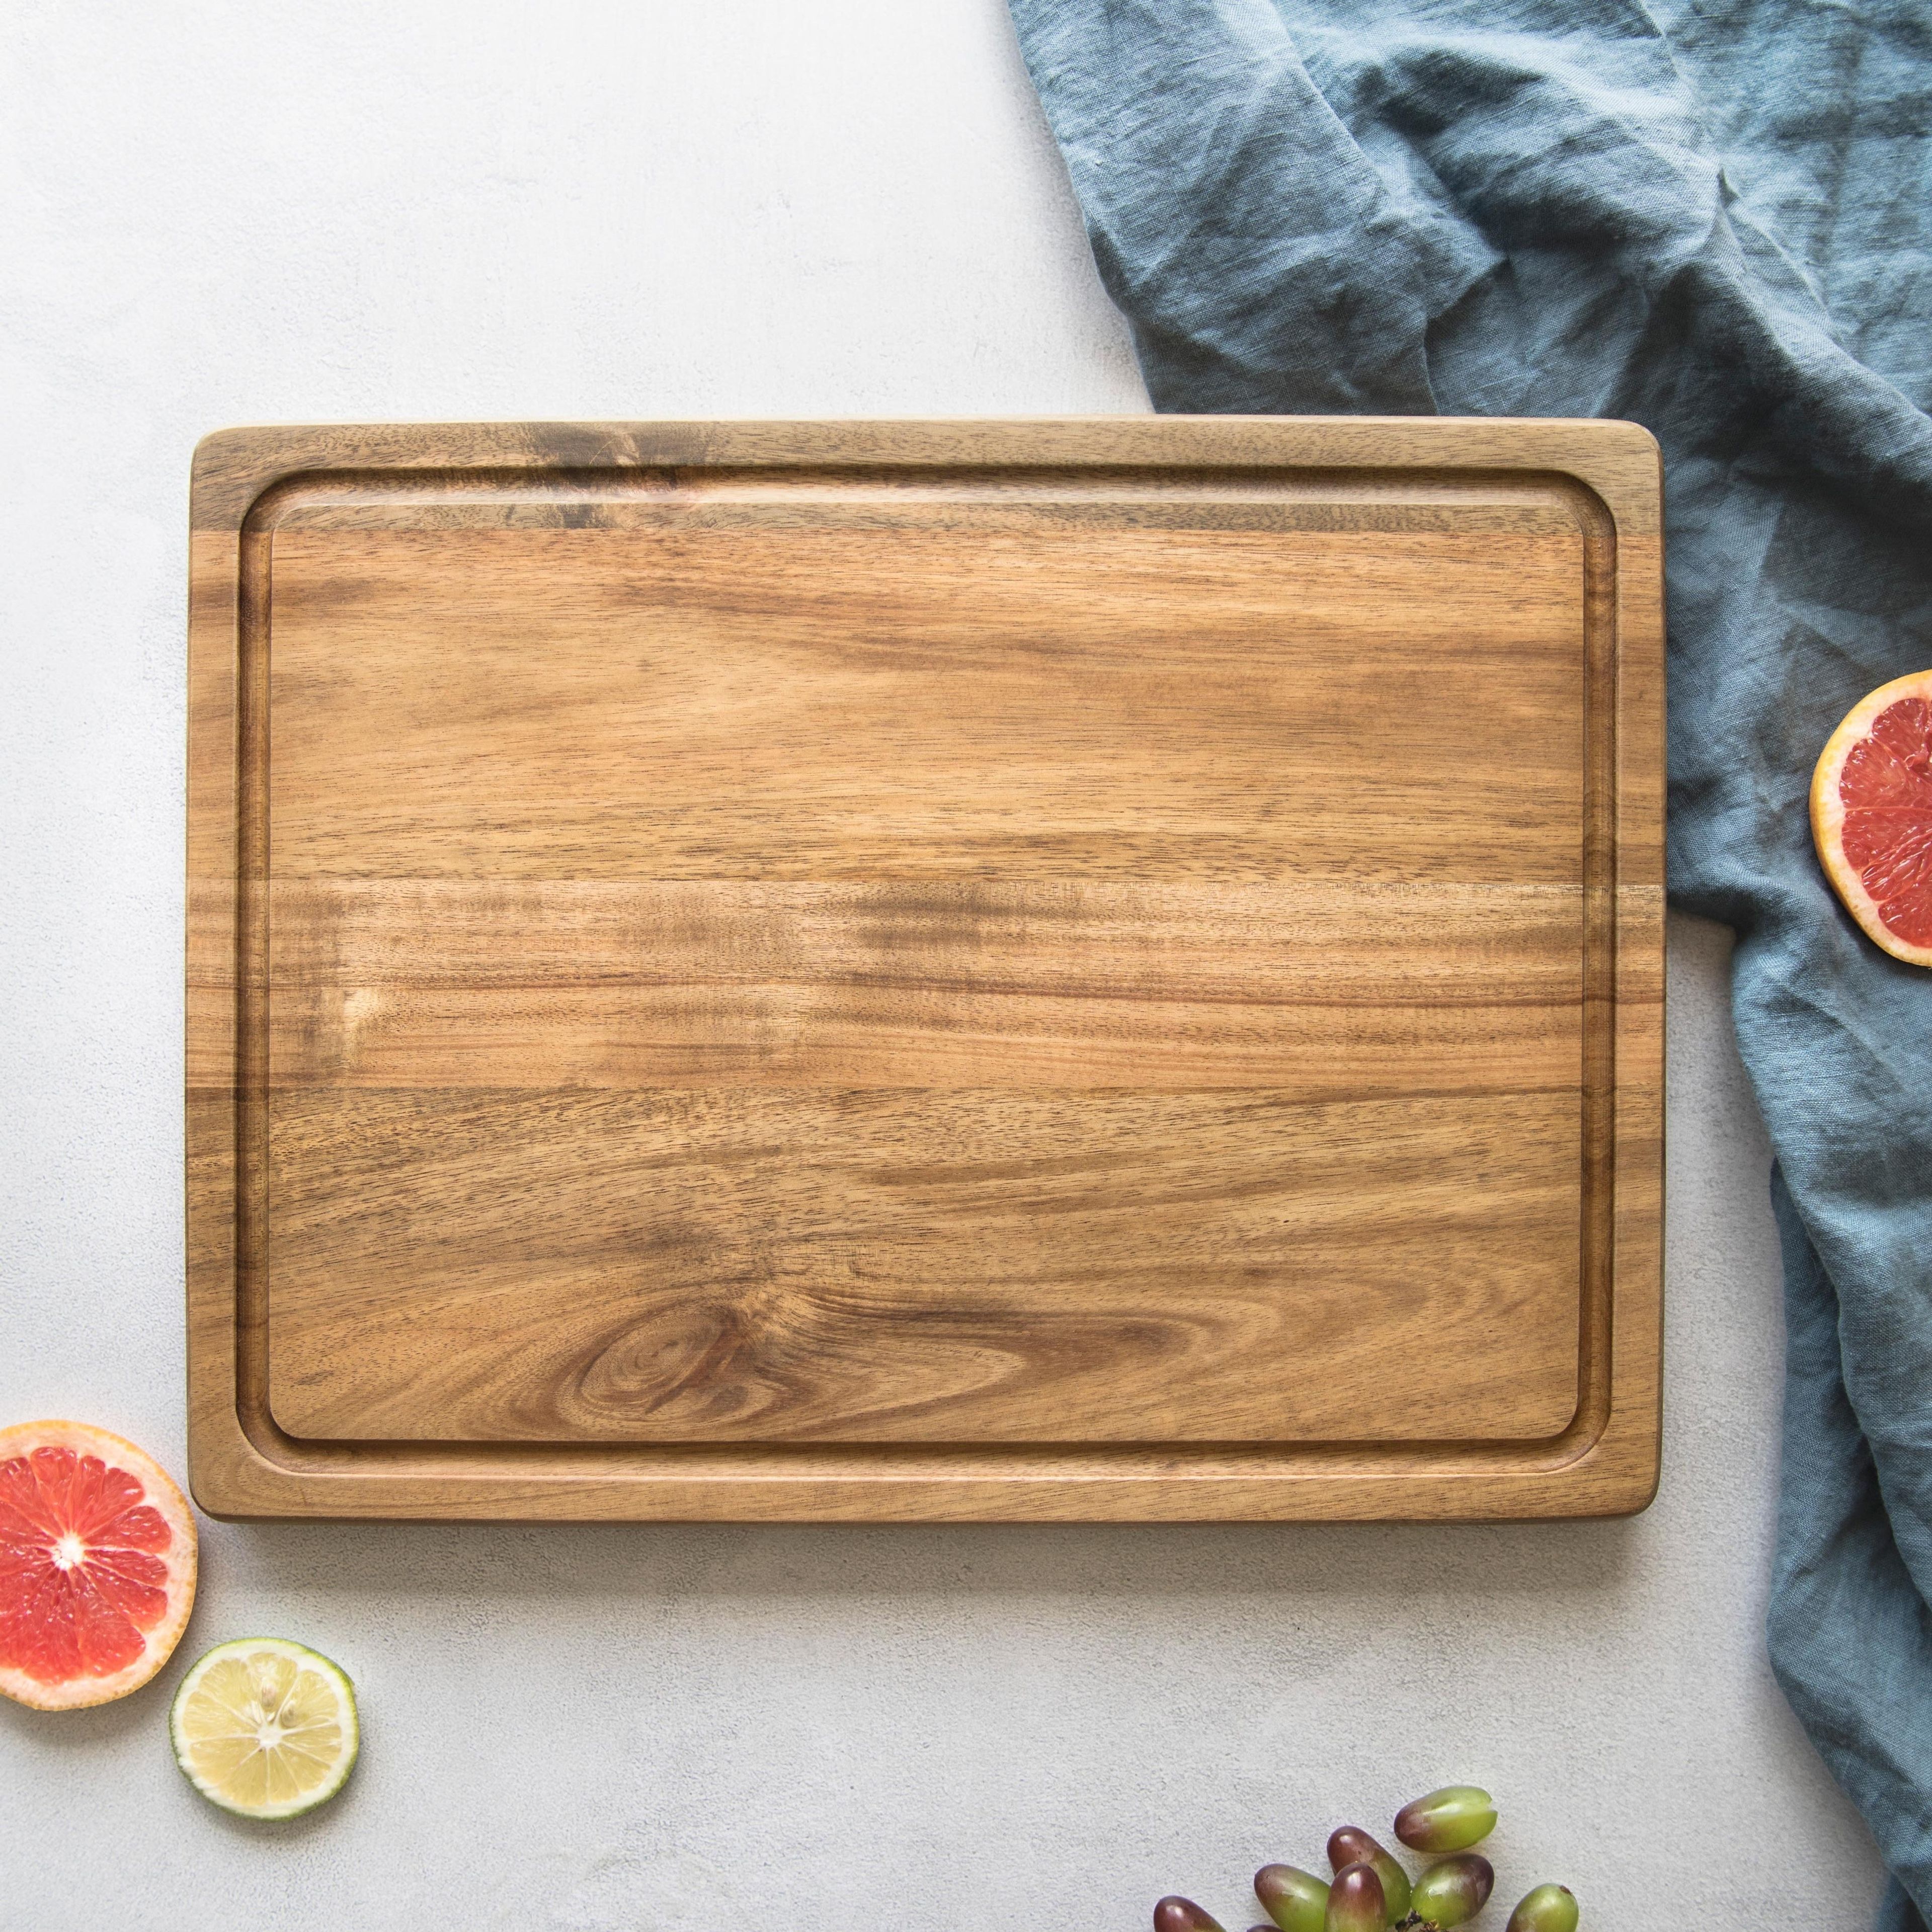 Large Cutting Board & Professional Heavy Duty Butcher Block w/Juice Groove Handle, Pre Oiled